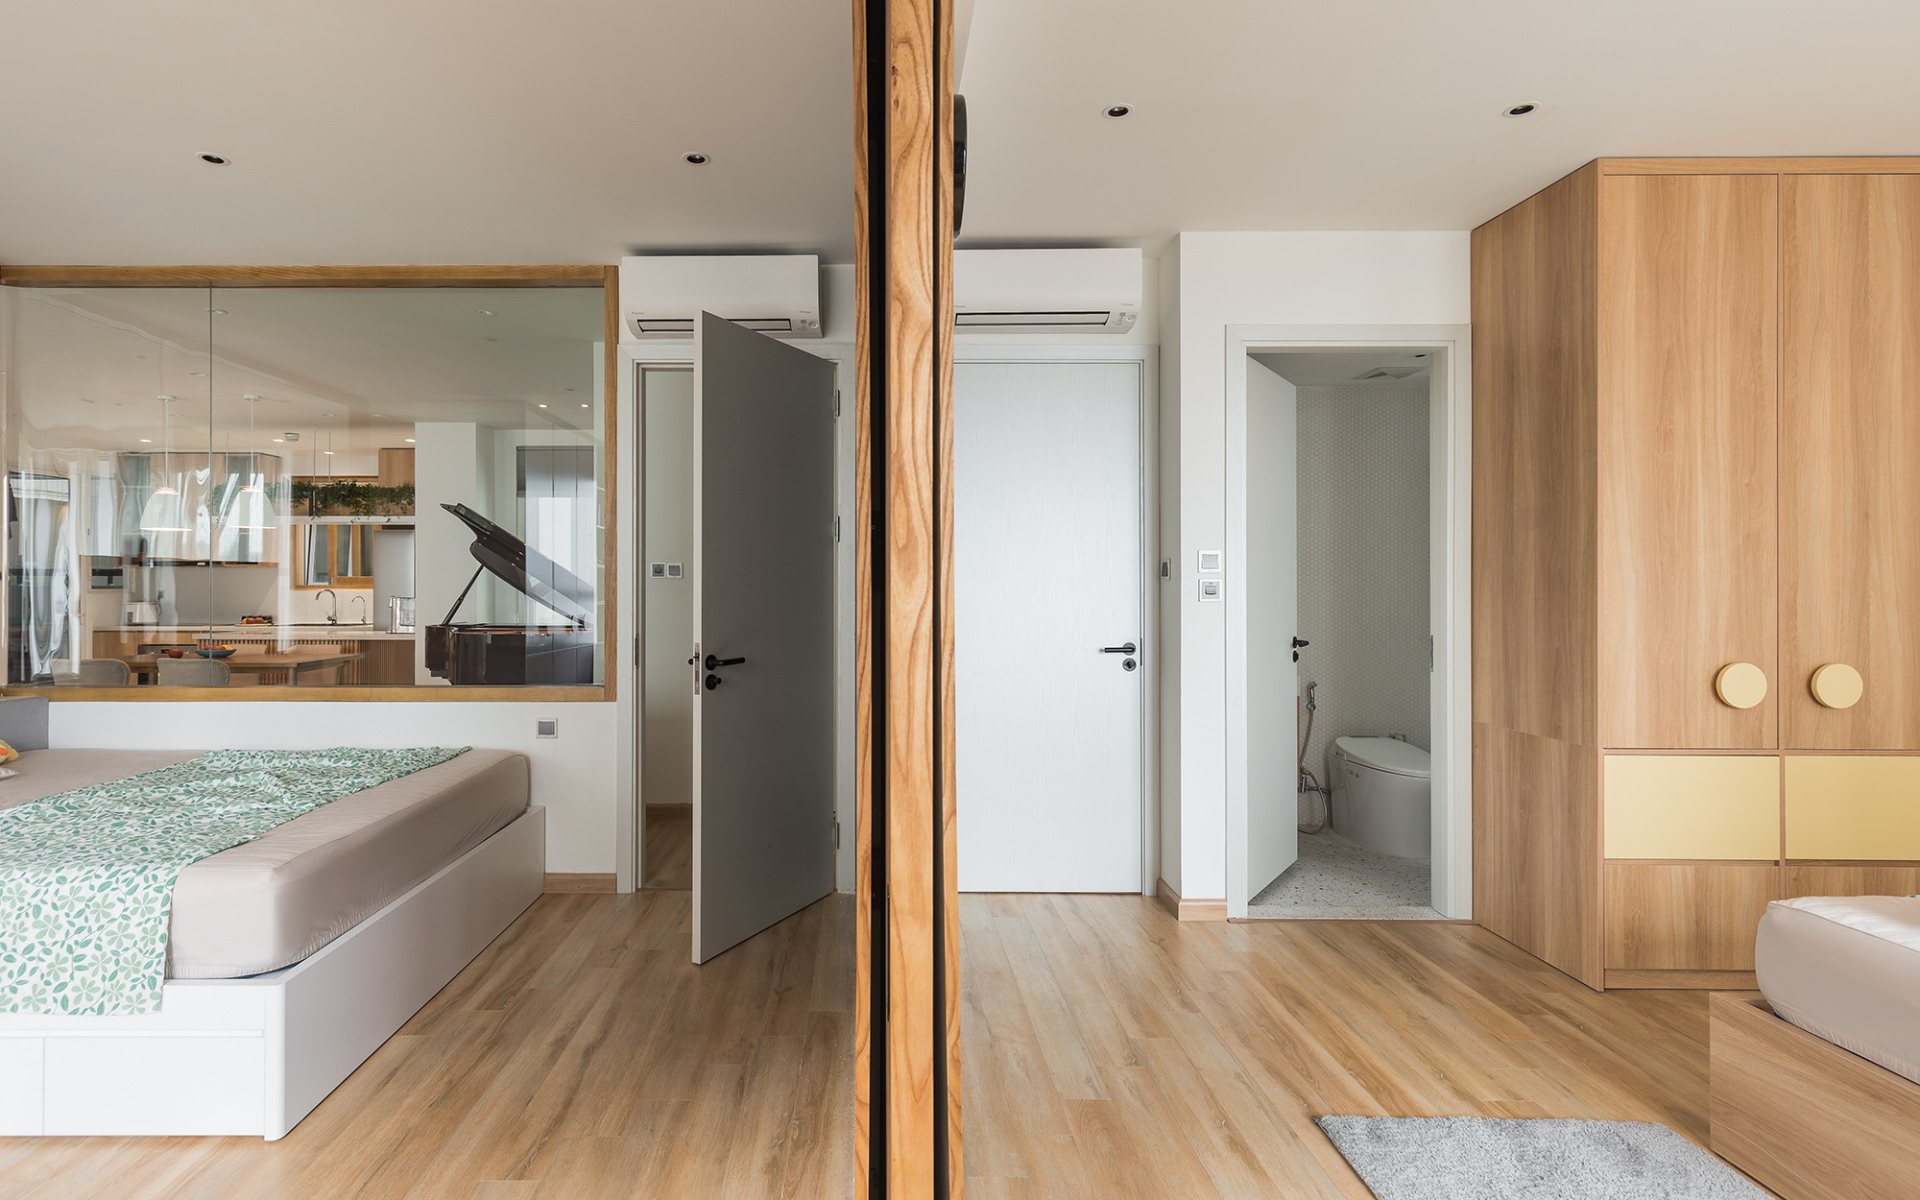 Sliding doors help two sisters easily connect when they want to talk and play, and also help separate the space when privacy is needed.